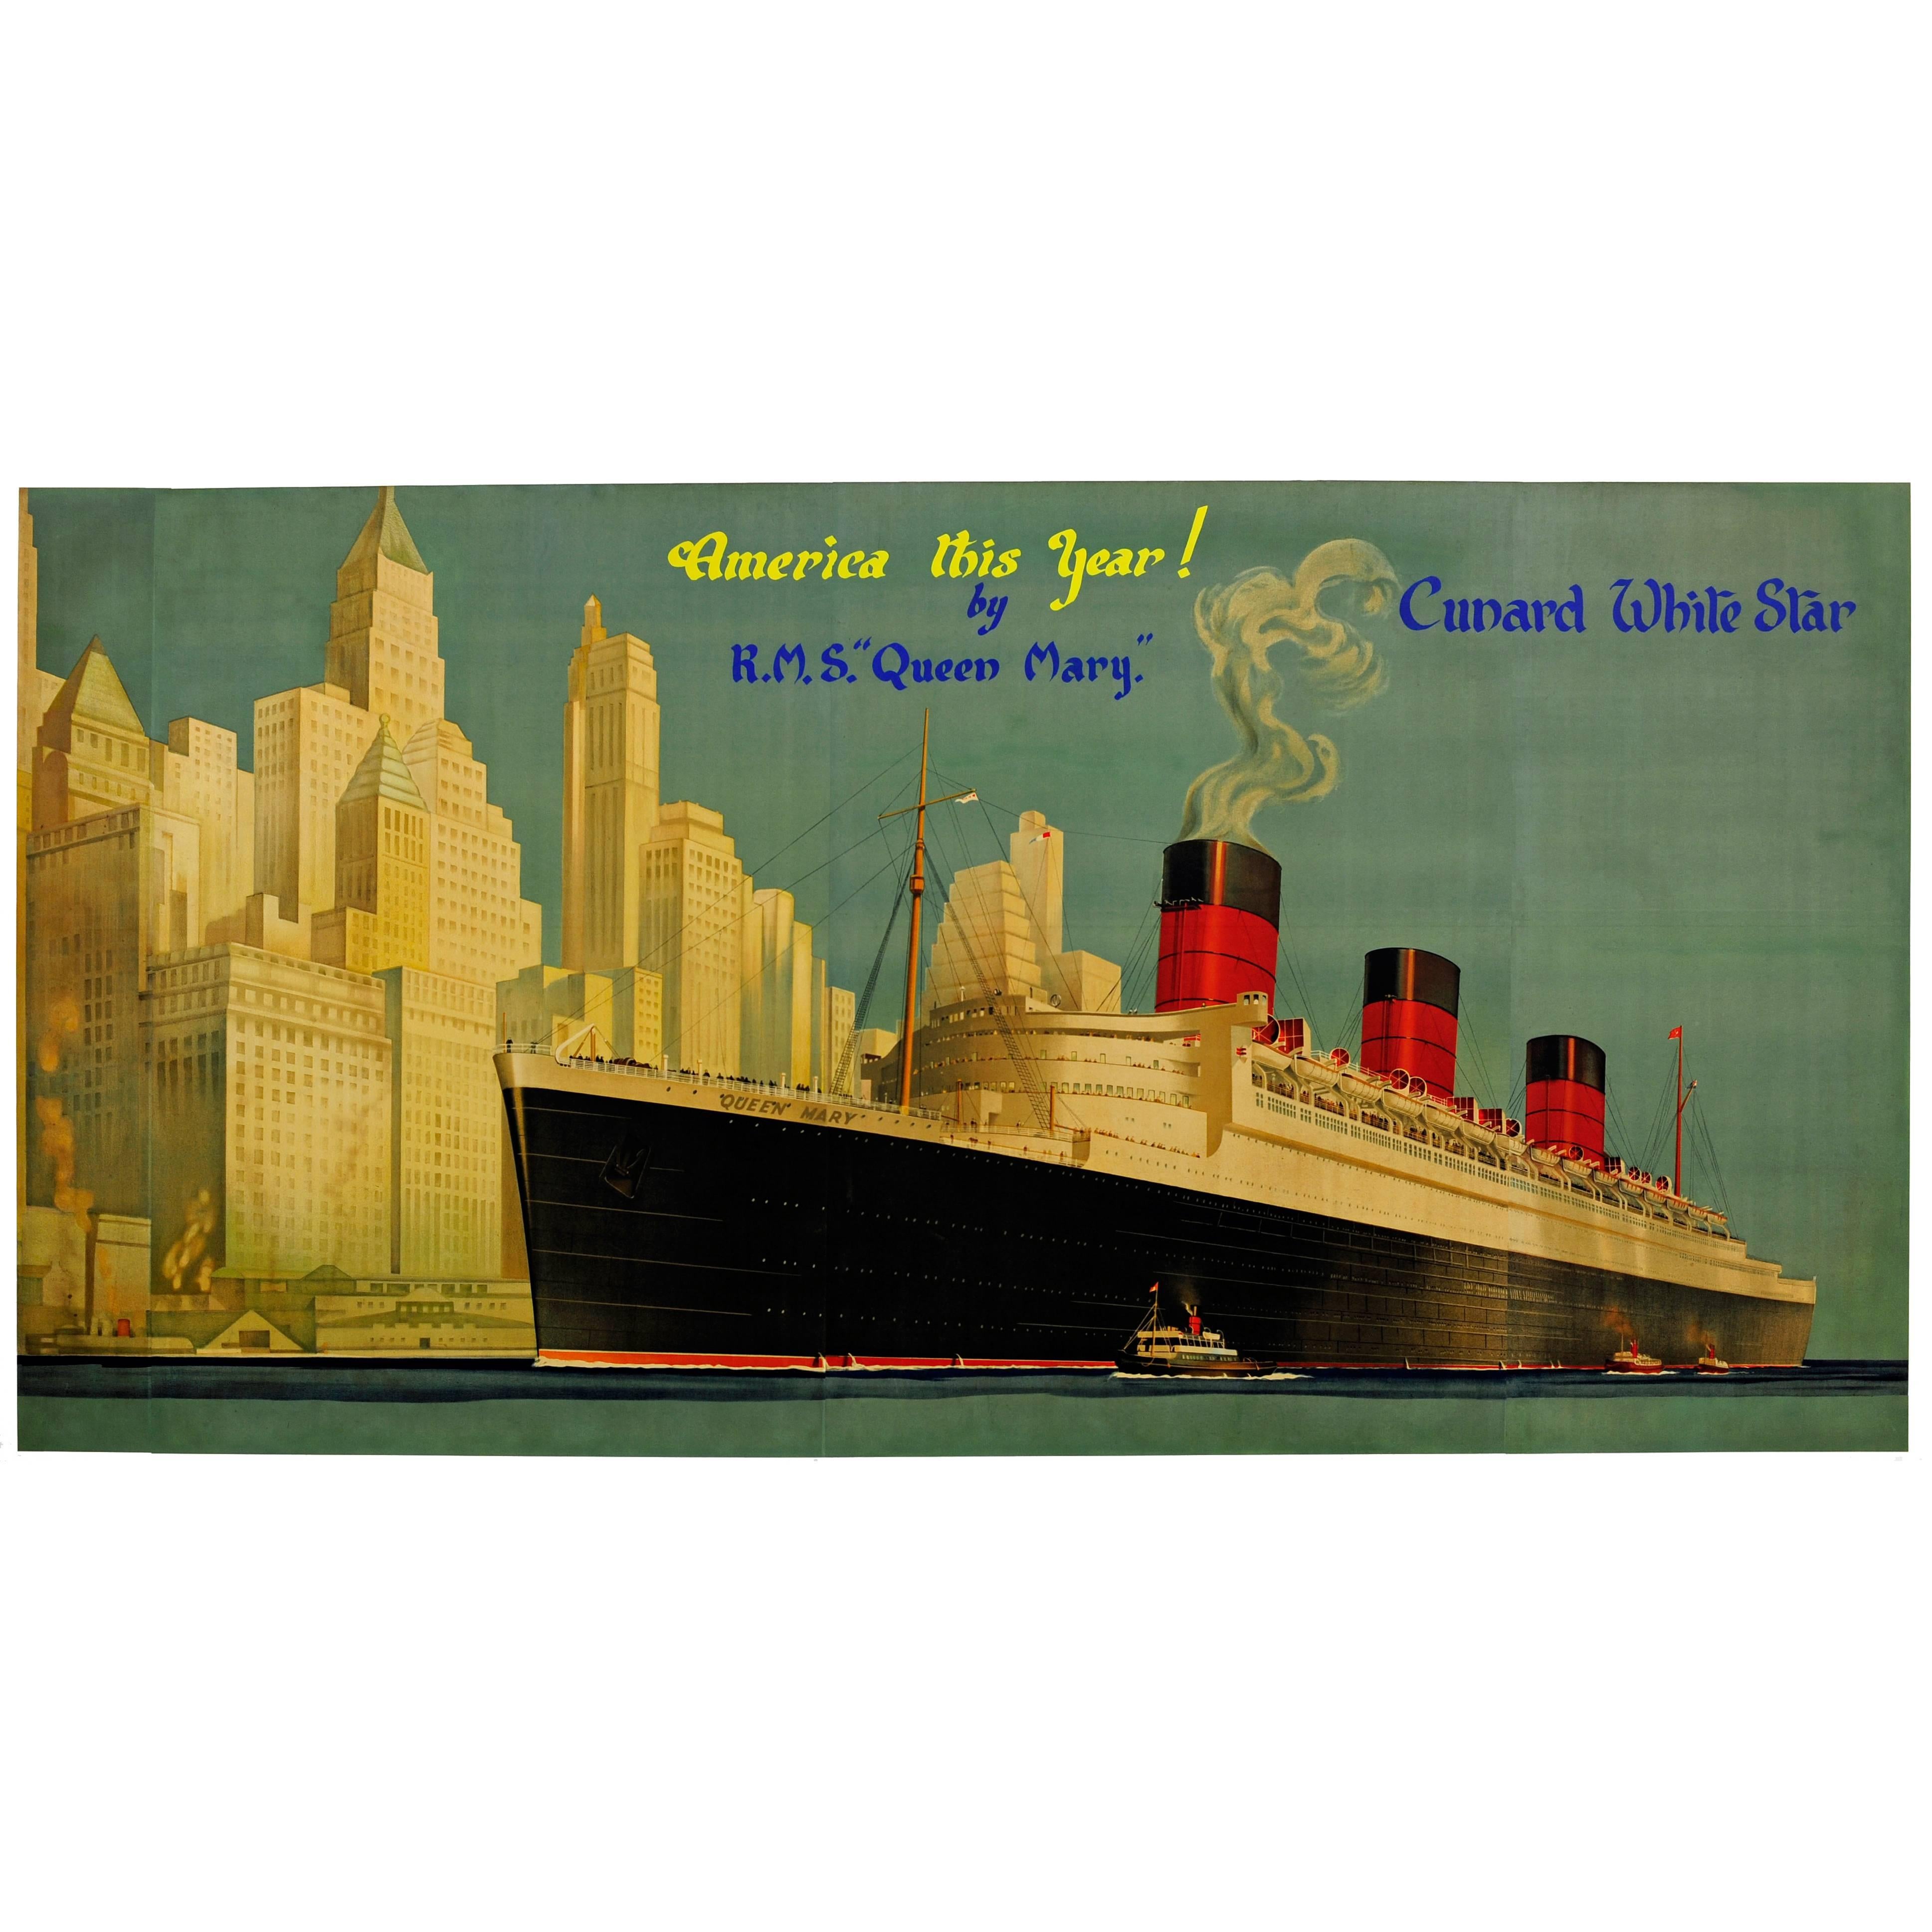 Very Rare Original 1930s Cunard White Star Queen Mary Poster "America This Year"